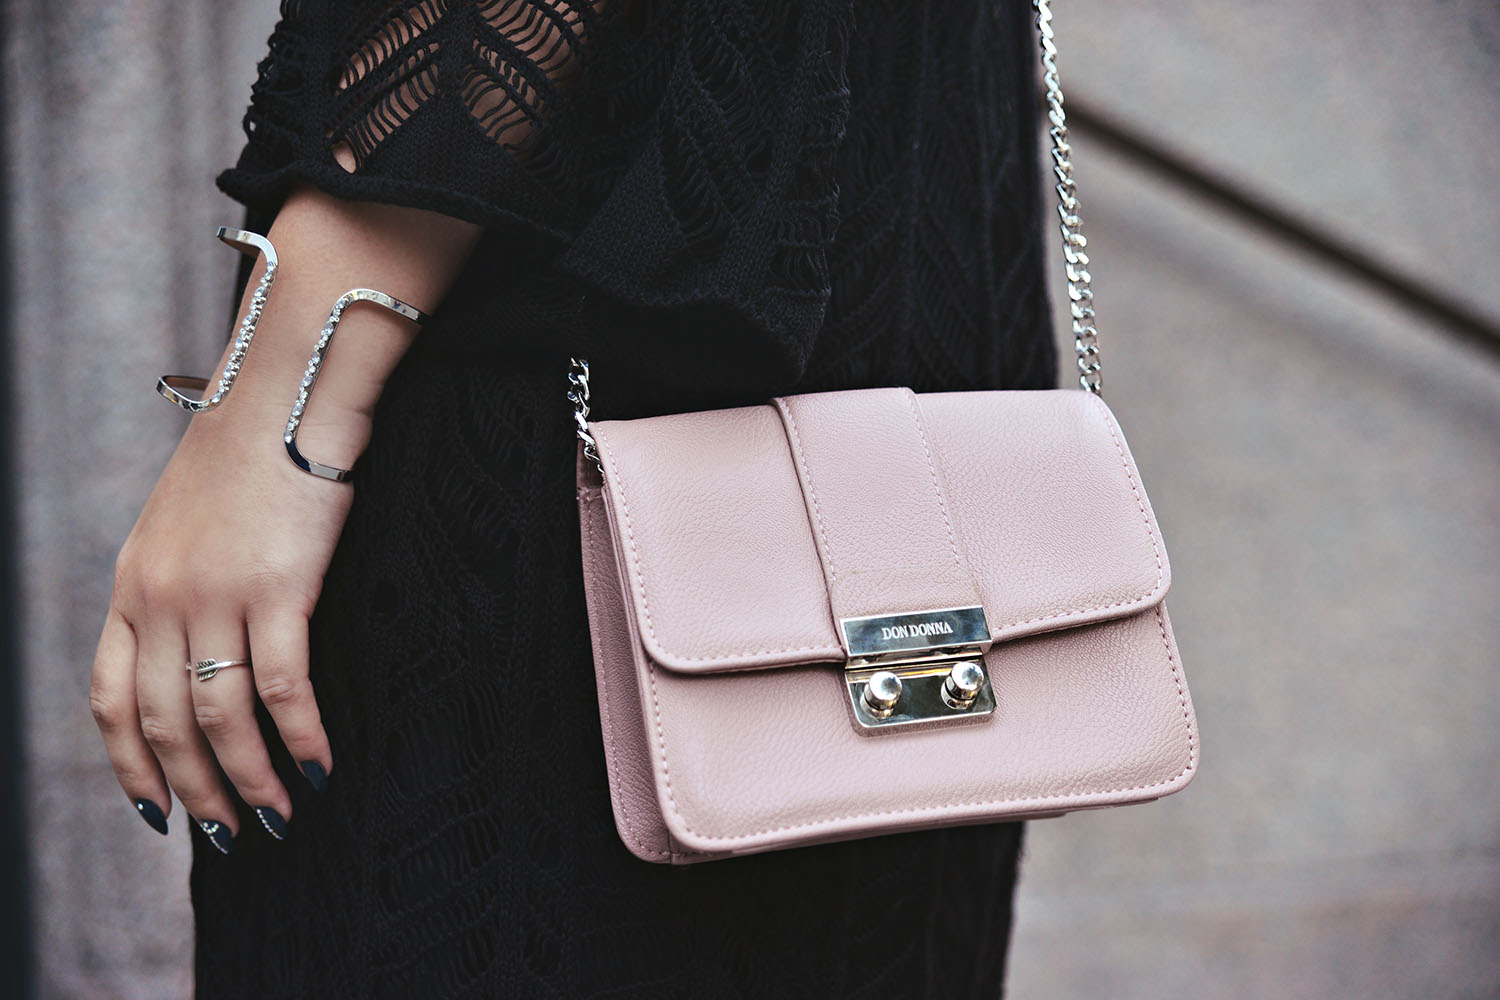 Don Donna Pink Mini Bag Outfit